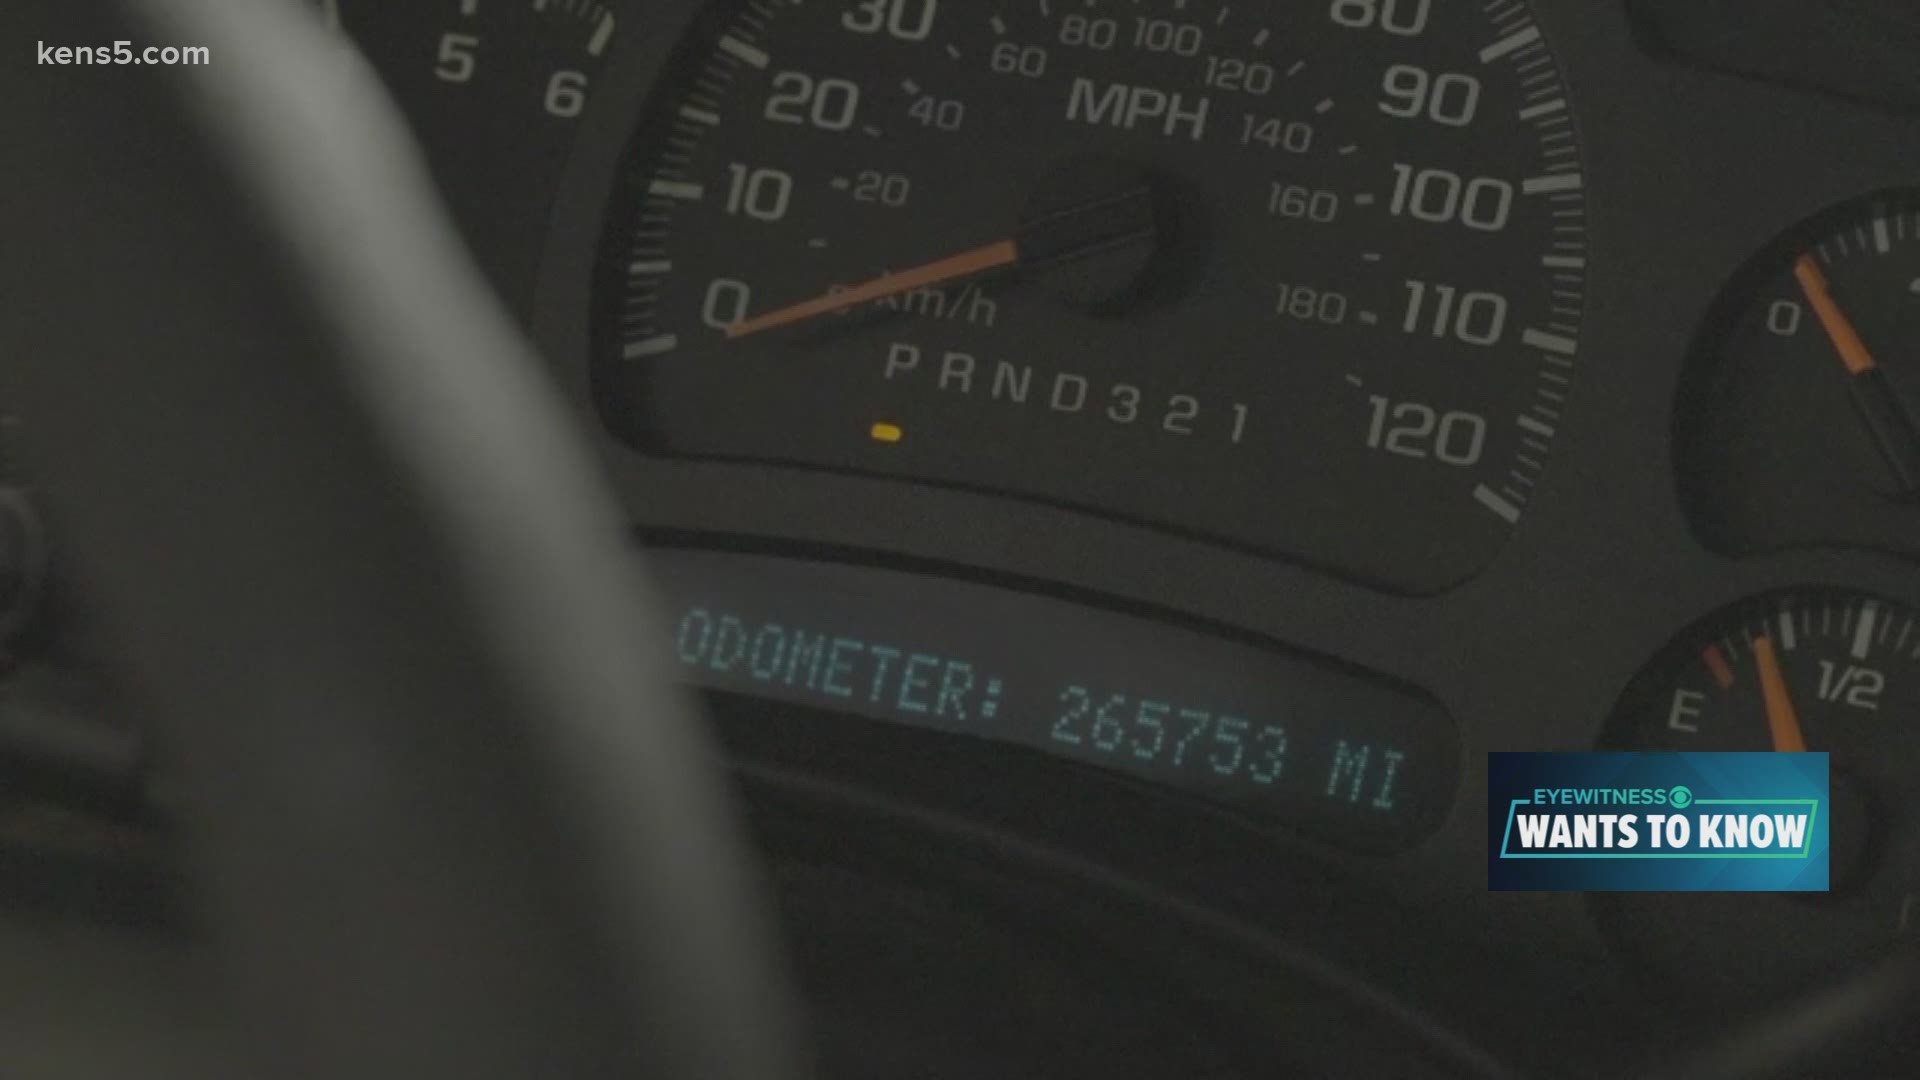 KENS 5 explains the steps to take and signs to look for to see if the used car you are considering has a tampered odometer.